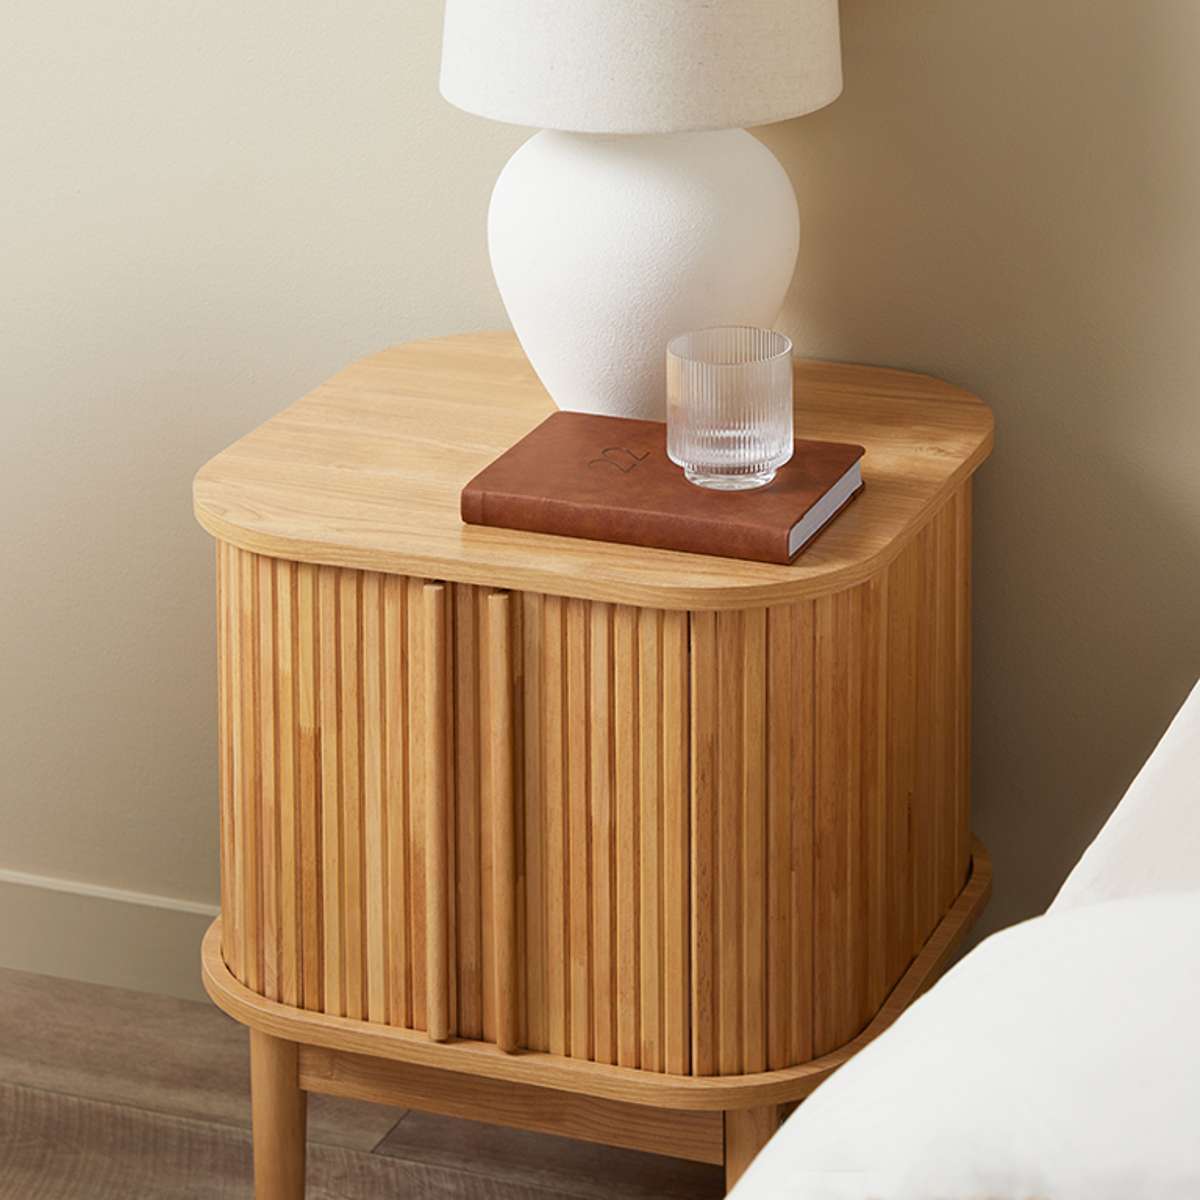 Maeve Bedside Table